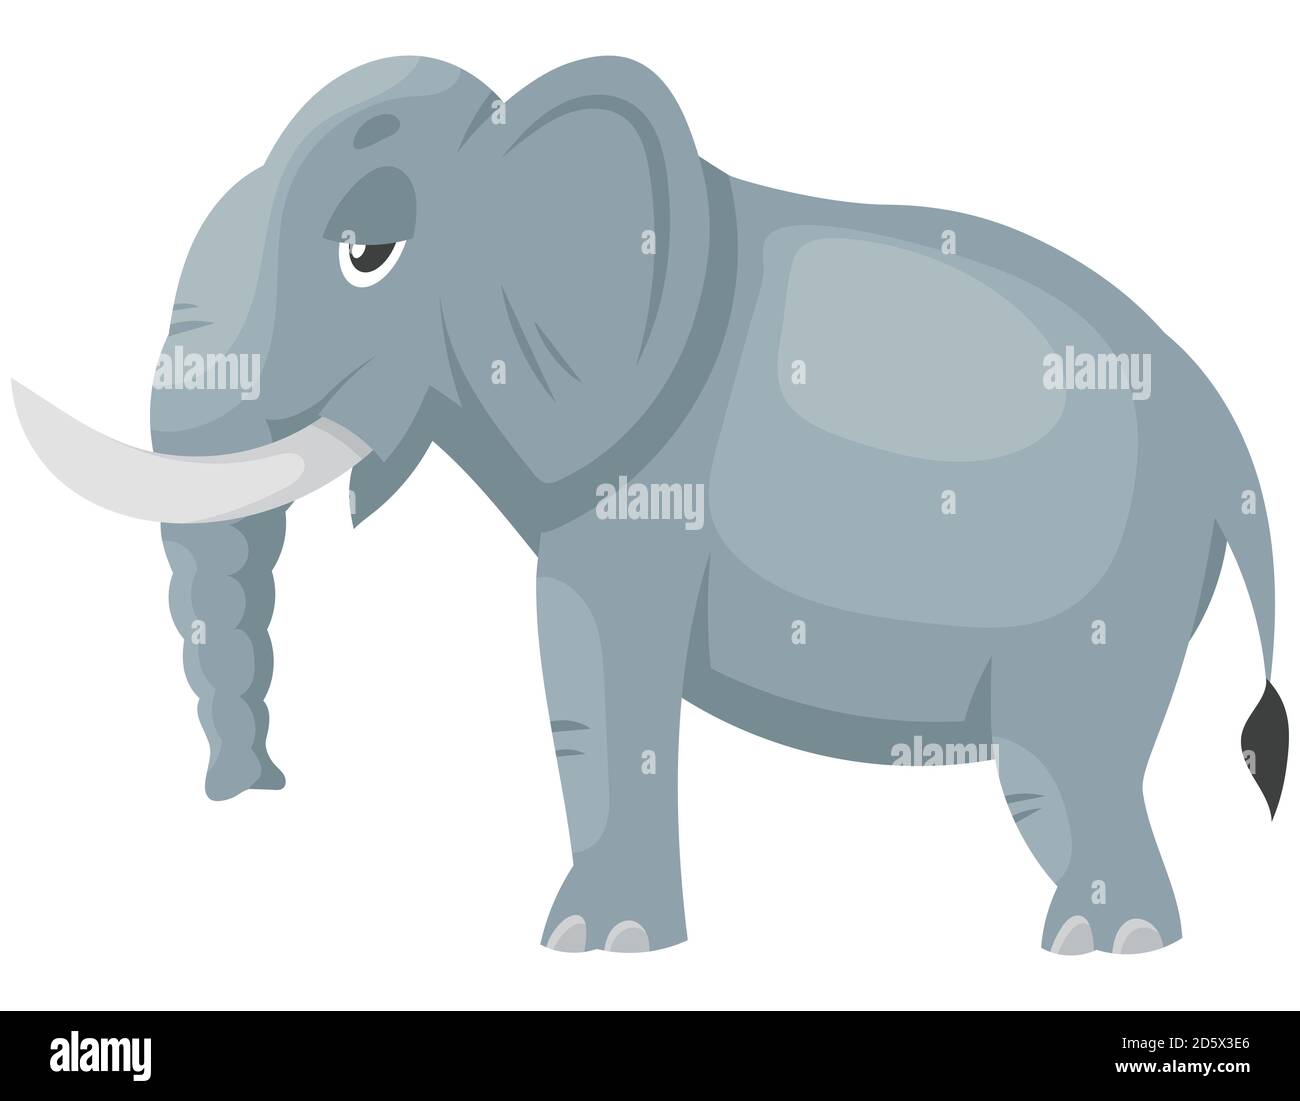 Standing elephant side view. African animal in cartoon style. Stock Vector